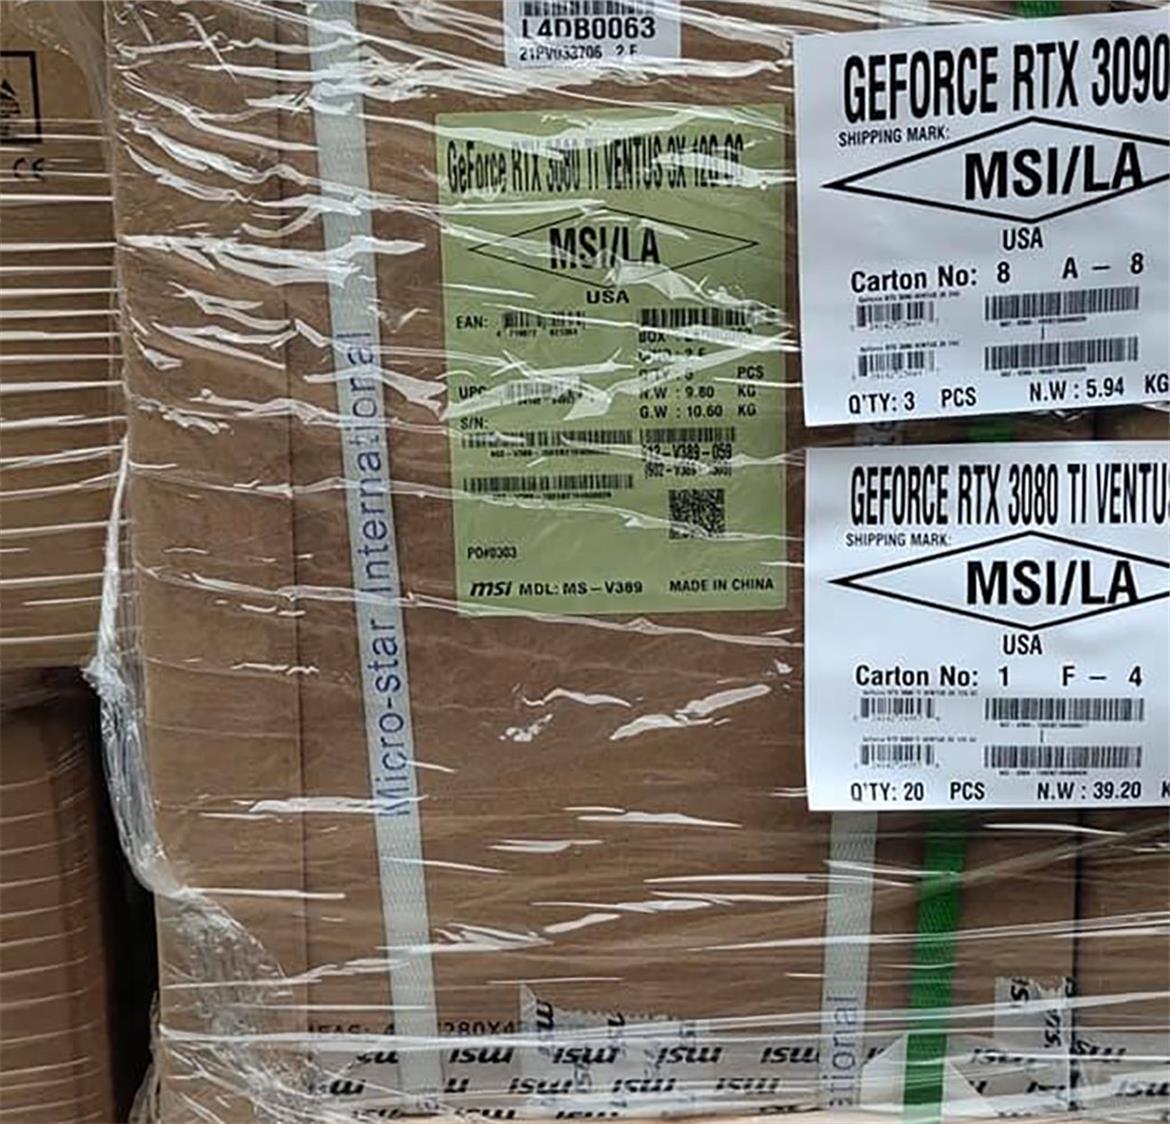 NVIDIA GeForce RTX 3080 Ti 12GB Cards Are Real And Shipping According To Leaked Photos